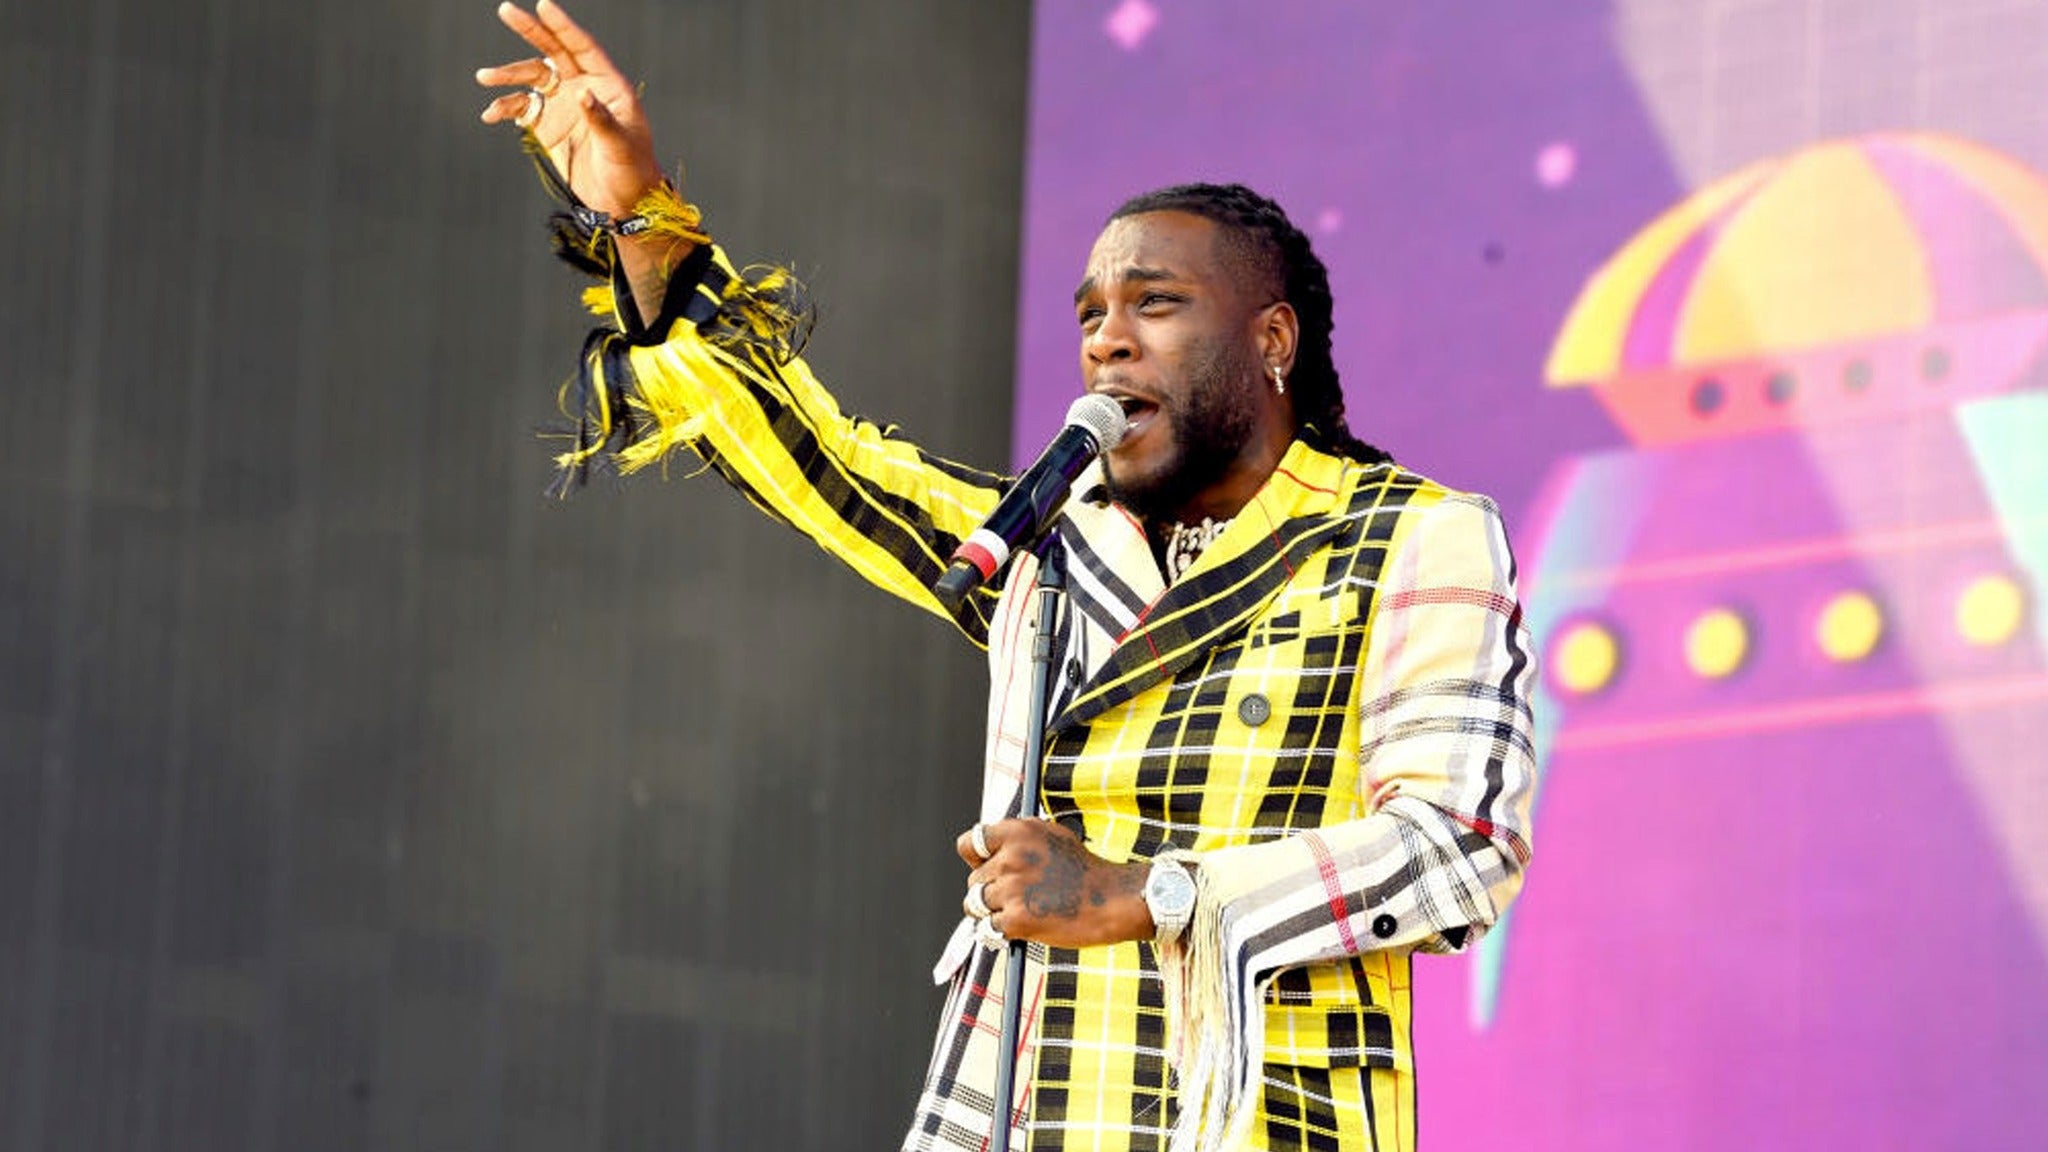 Burna Boy - Twice As Tall Tour in San Francisco promo photo for Live Nation presale offer code